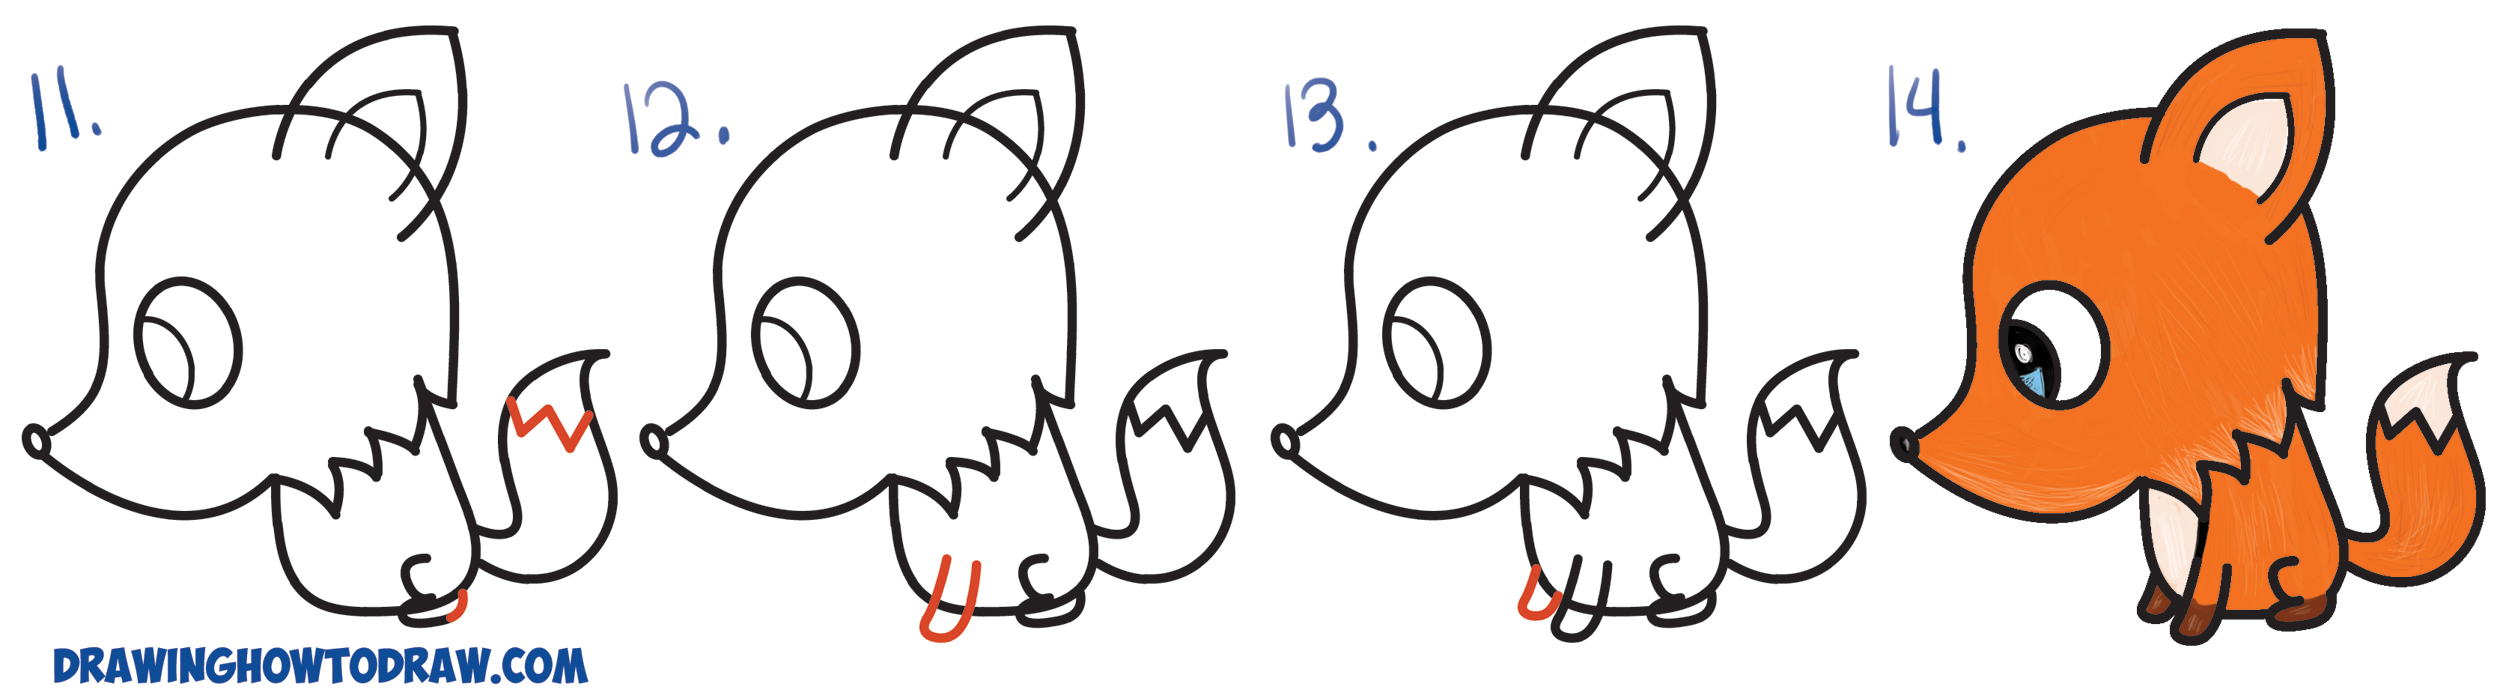 how to draw a fox from a question